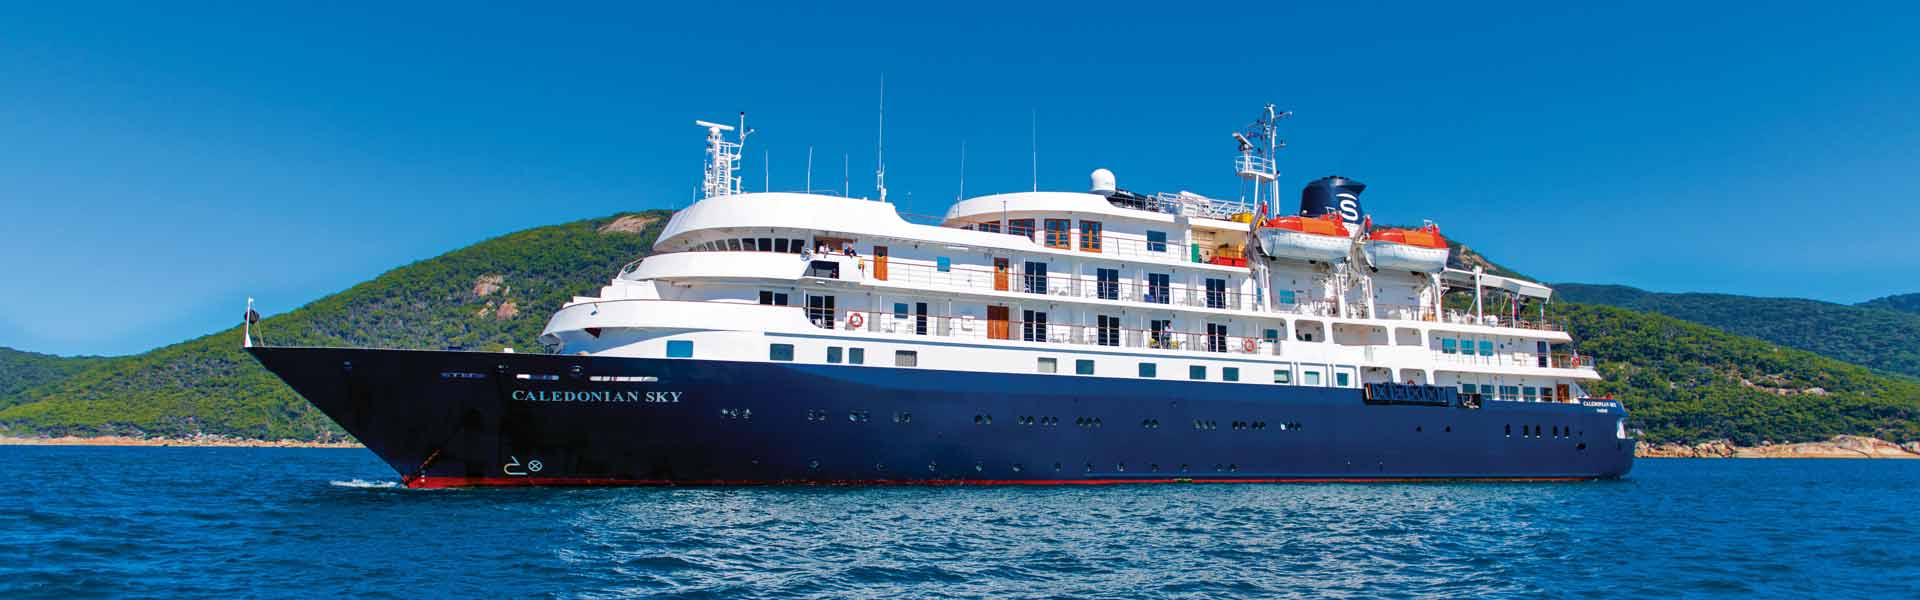 4 Nights MS Caledonian Sky Cruise Package with Transfers, Meals & More!